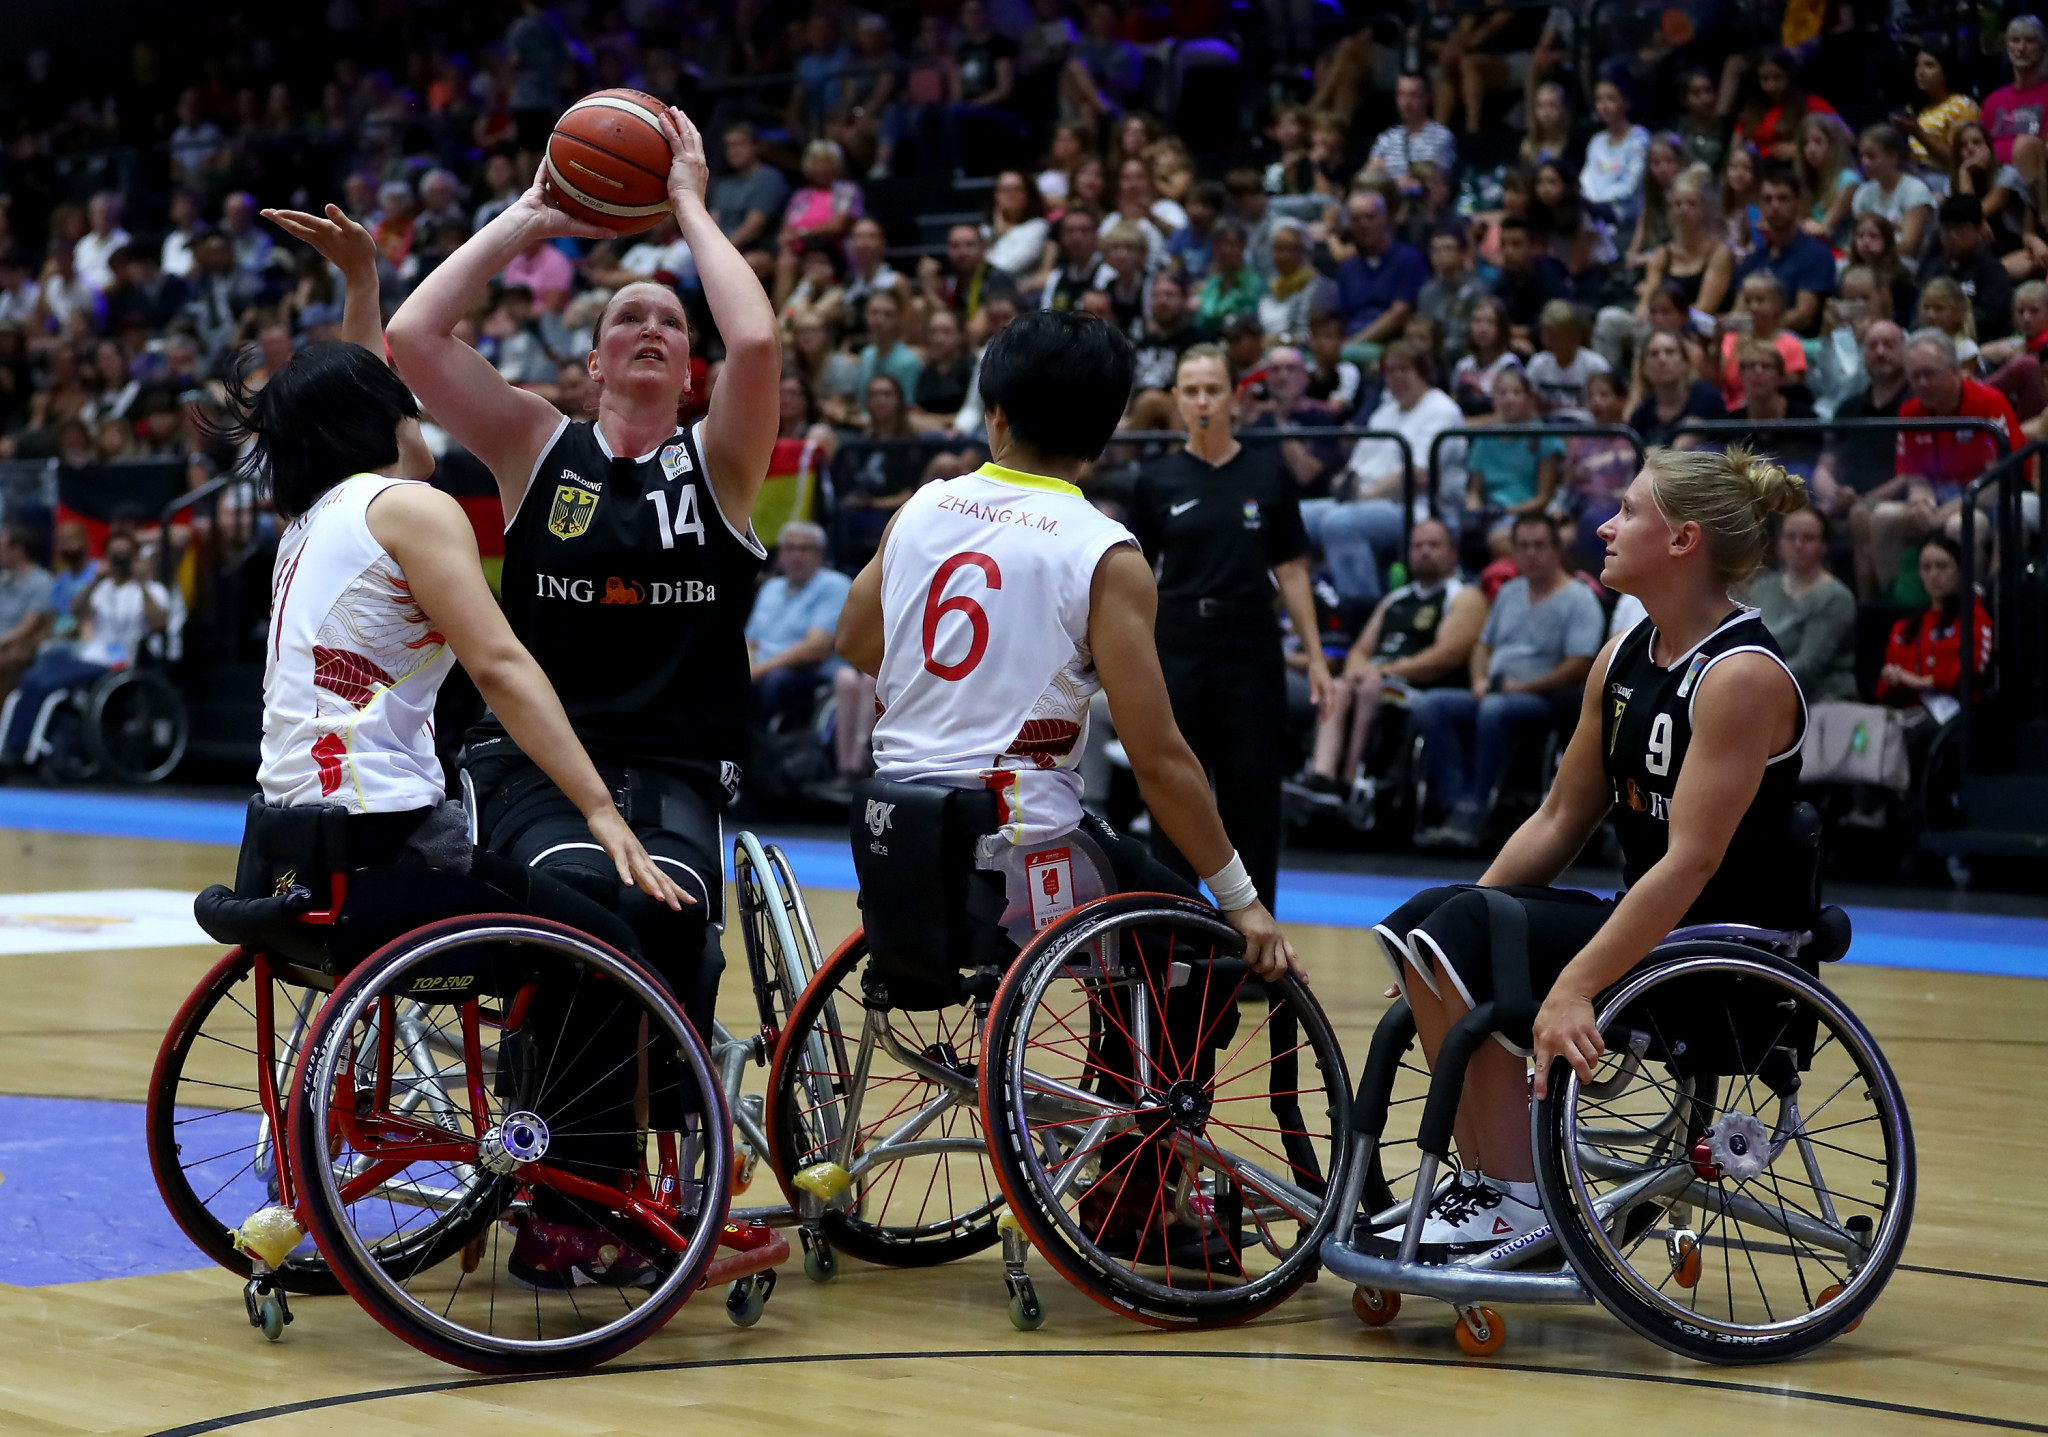 Horst Strohkendl became involved with wheelchair sports in 1969 and developed the classification code for wheelchair basketball ©Getty Images